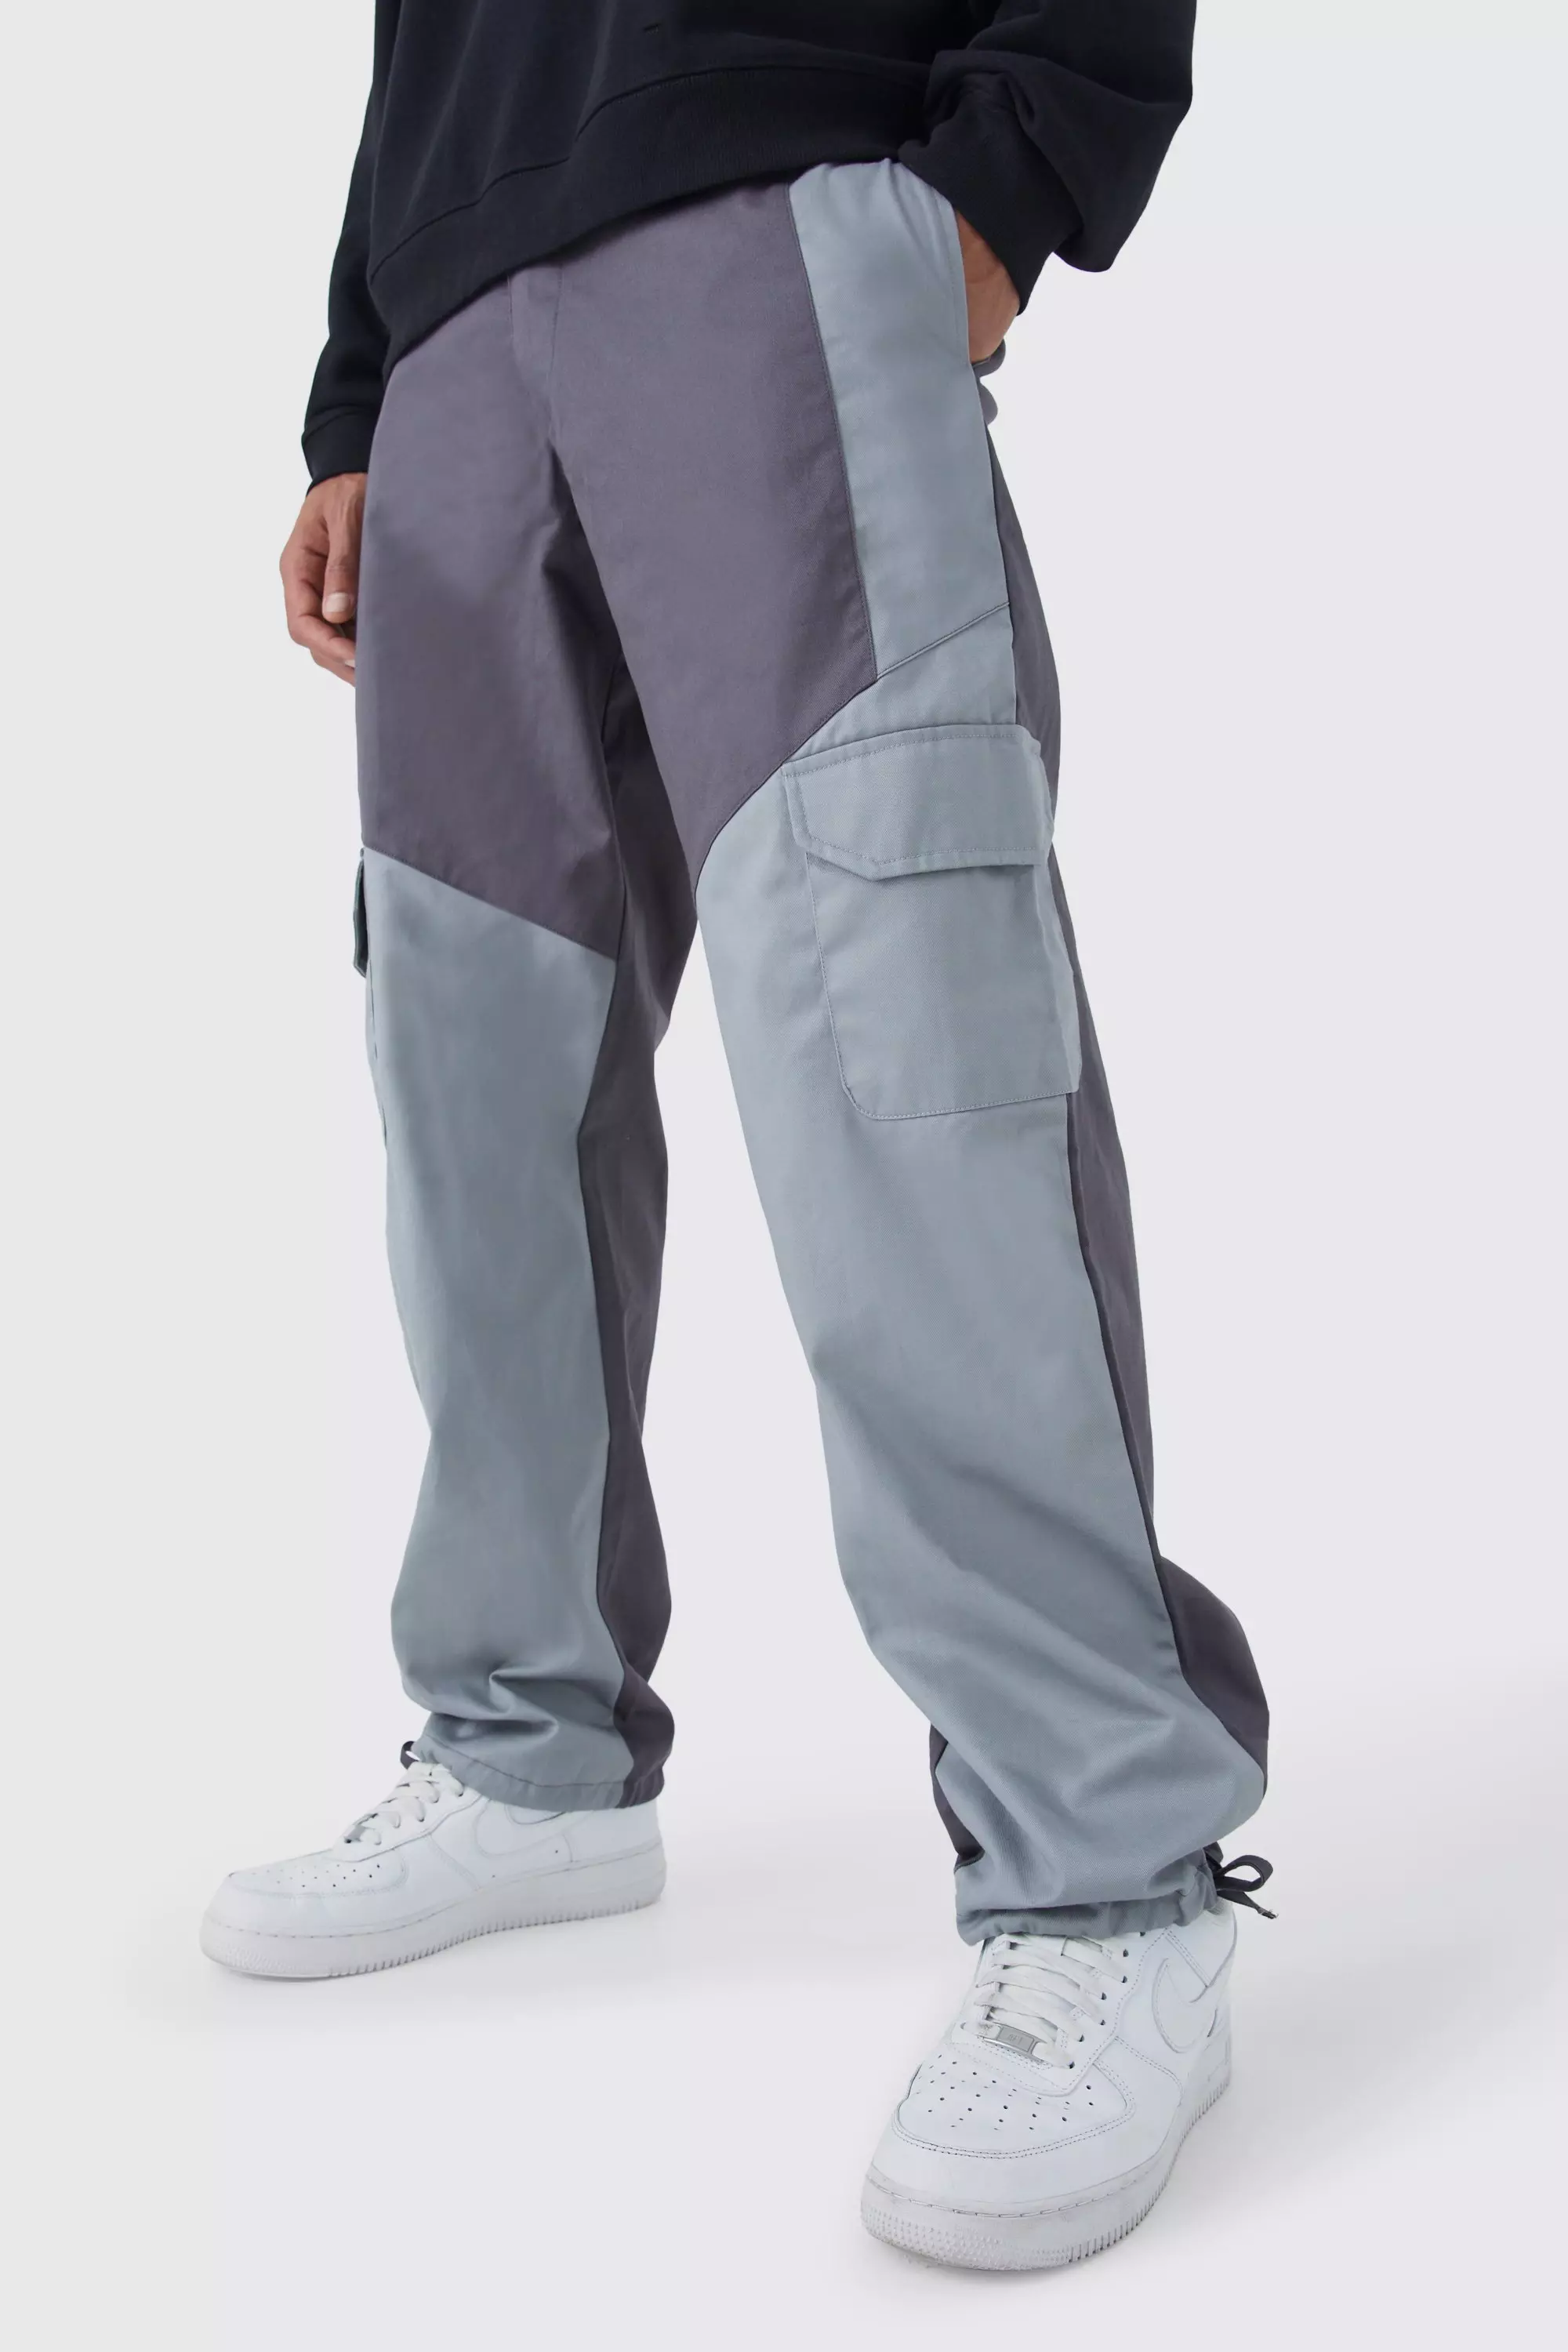 Charcoal Grey Tall Slim Fit Colour Block Cargo Pants With Woven Tab